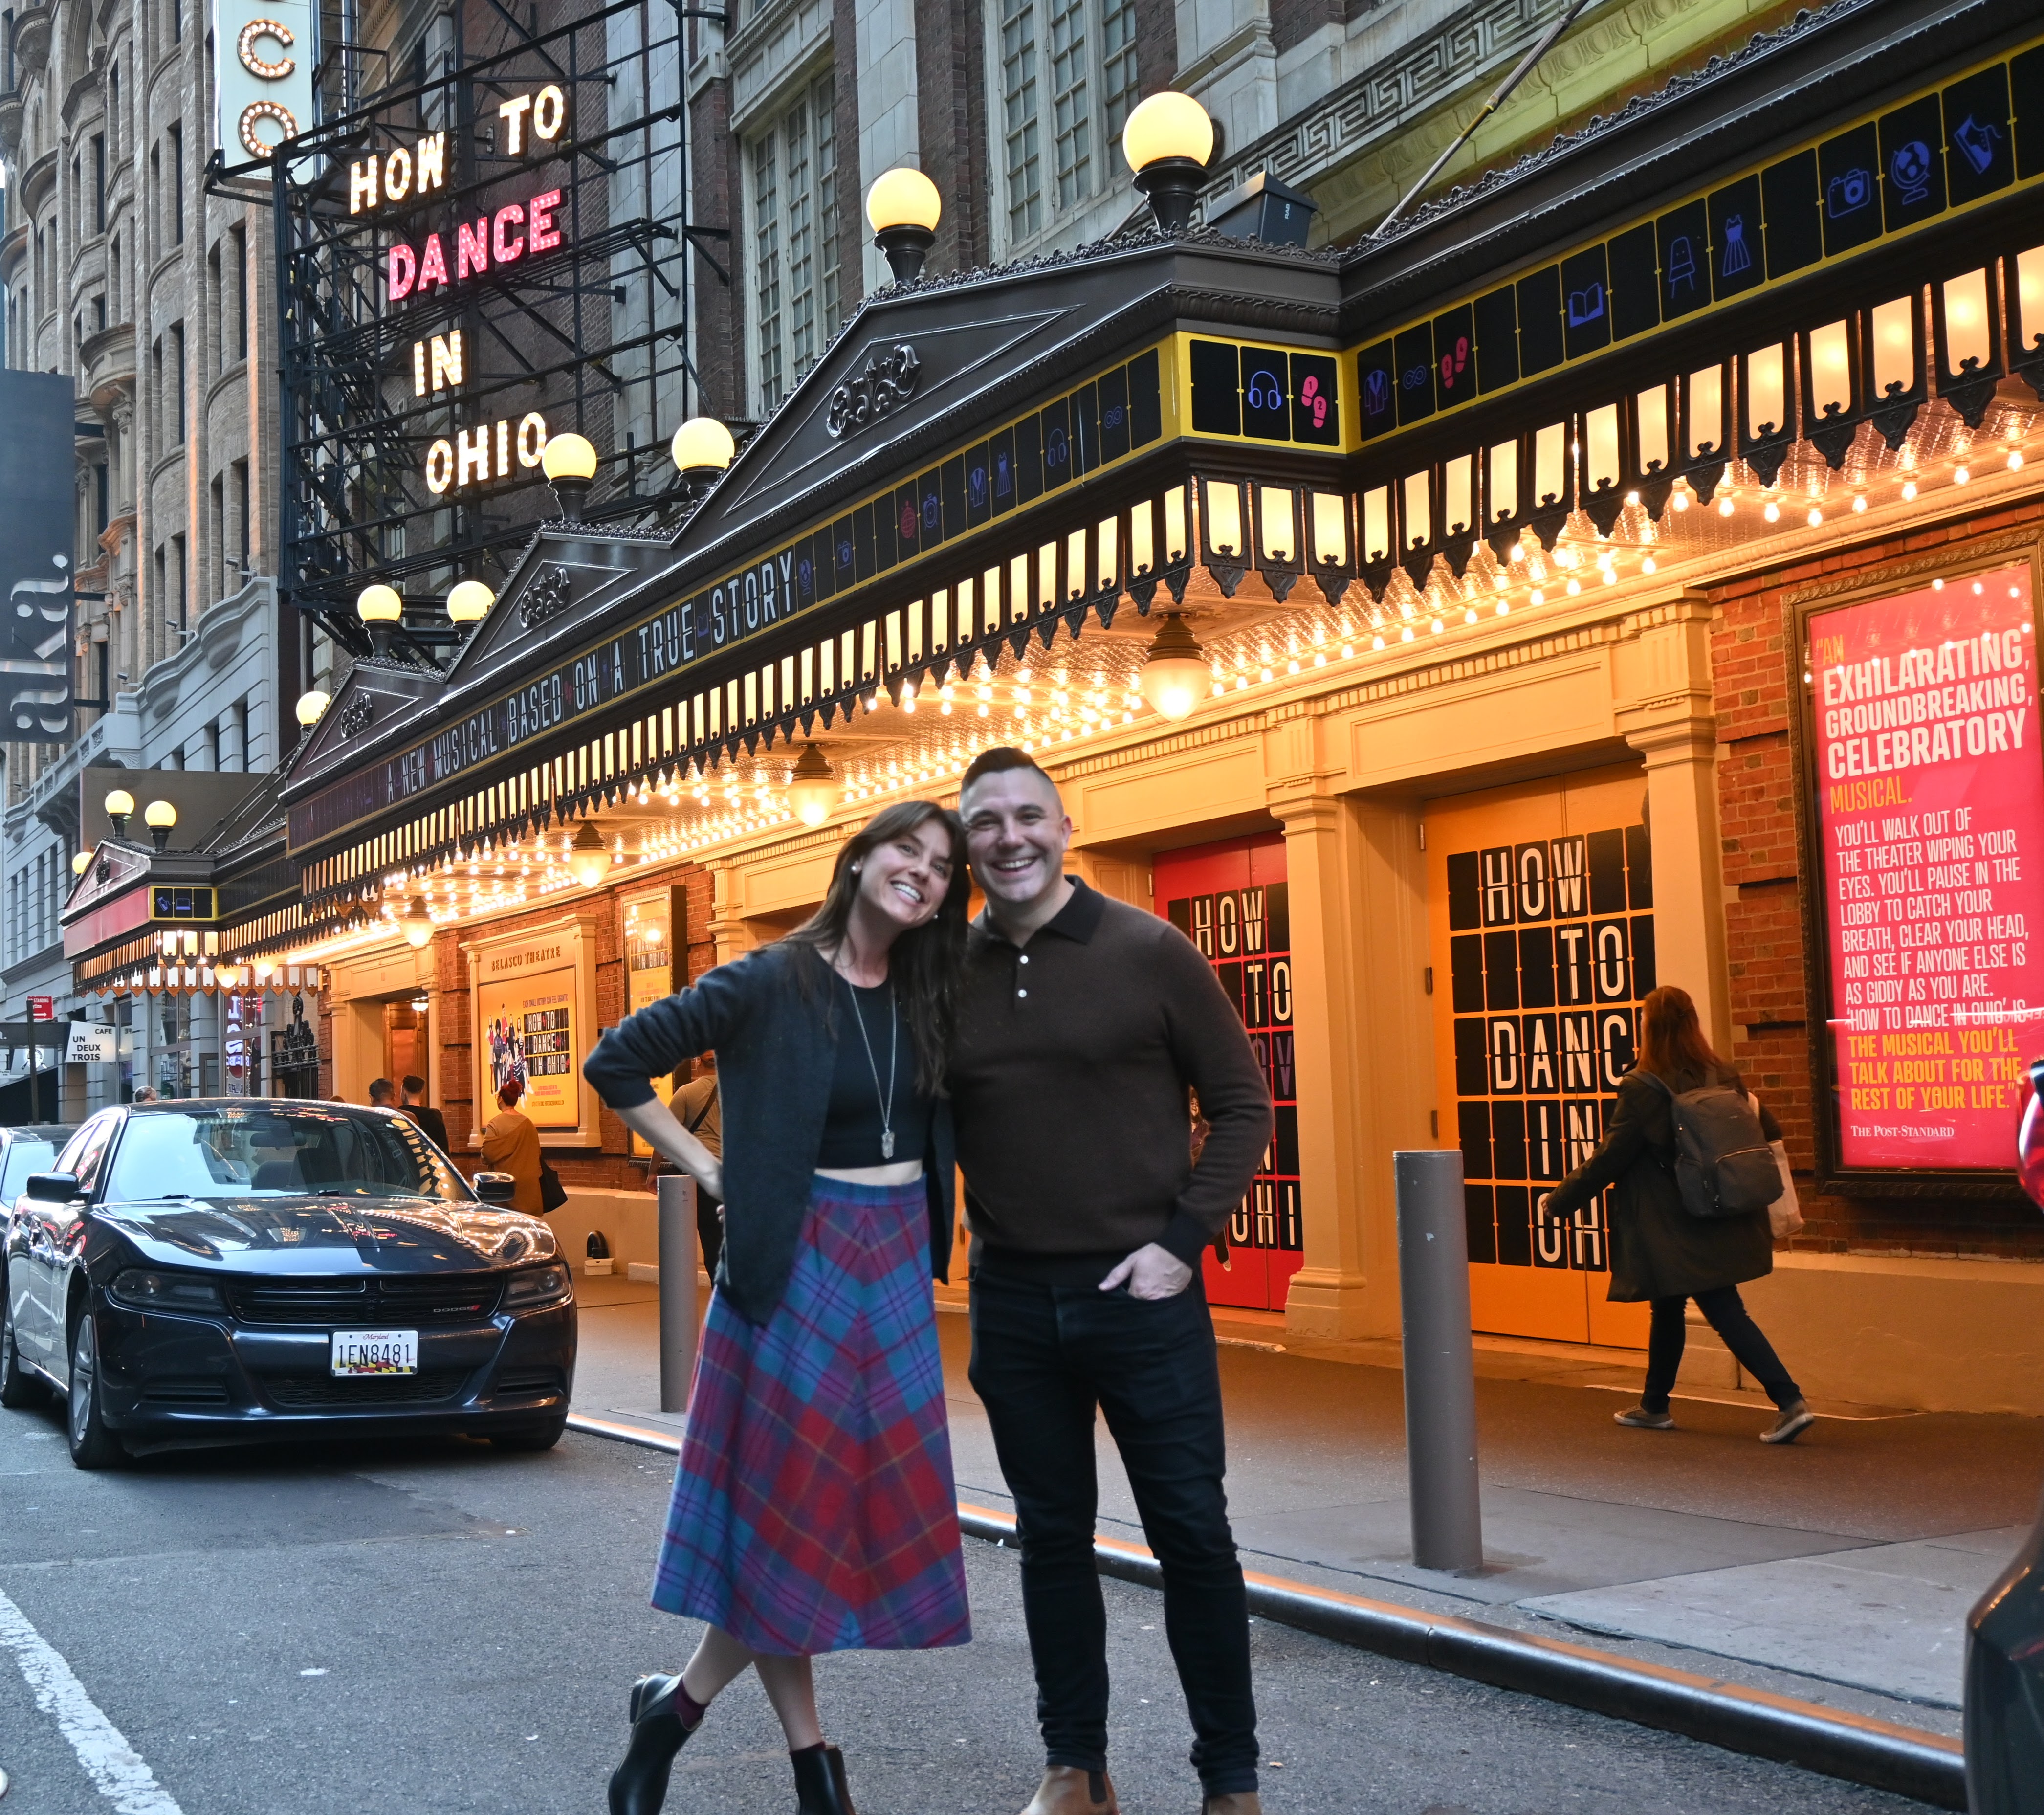 Jacob Yandura '09 with his songwriting partner Rebekah Greer Melocik in front of the marquee for "How to Dance in Ohio."